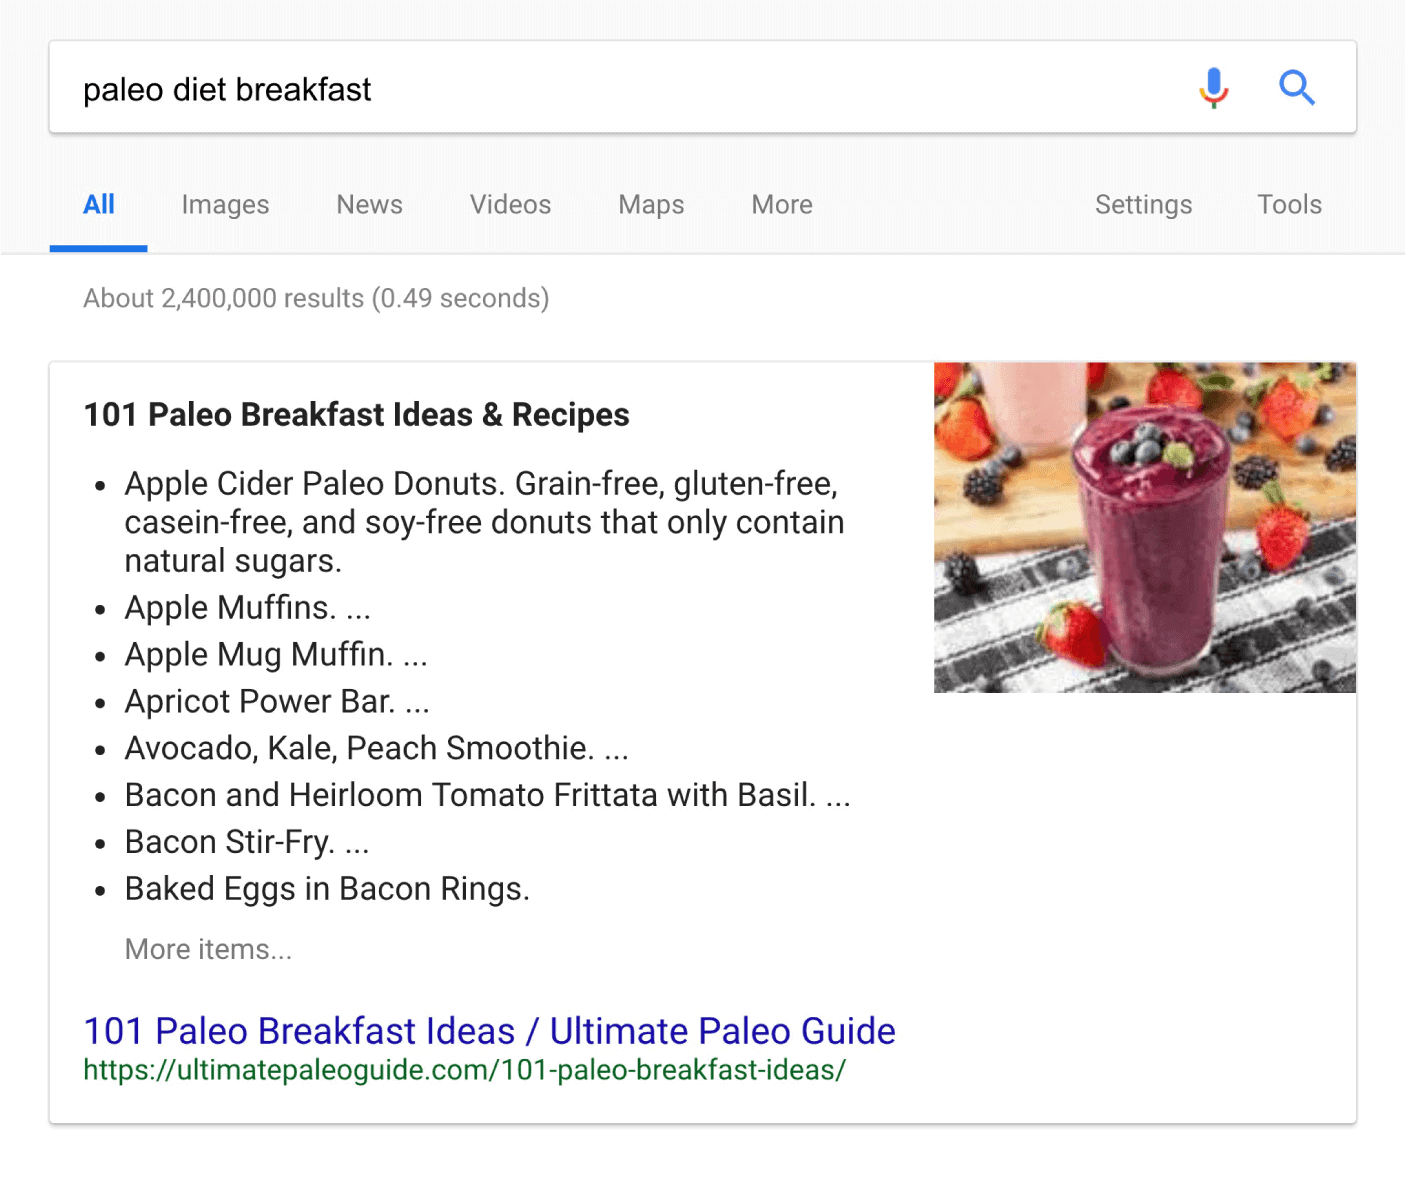 Featured snippet